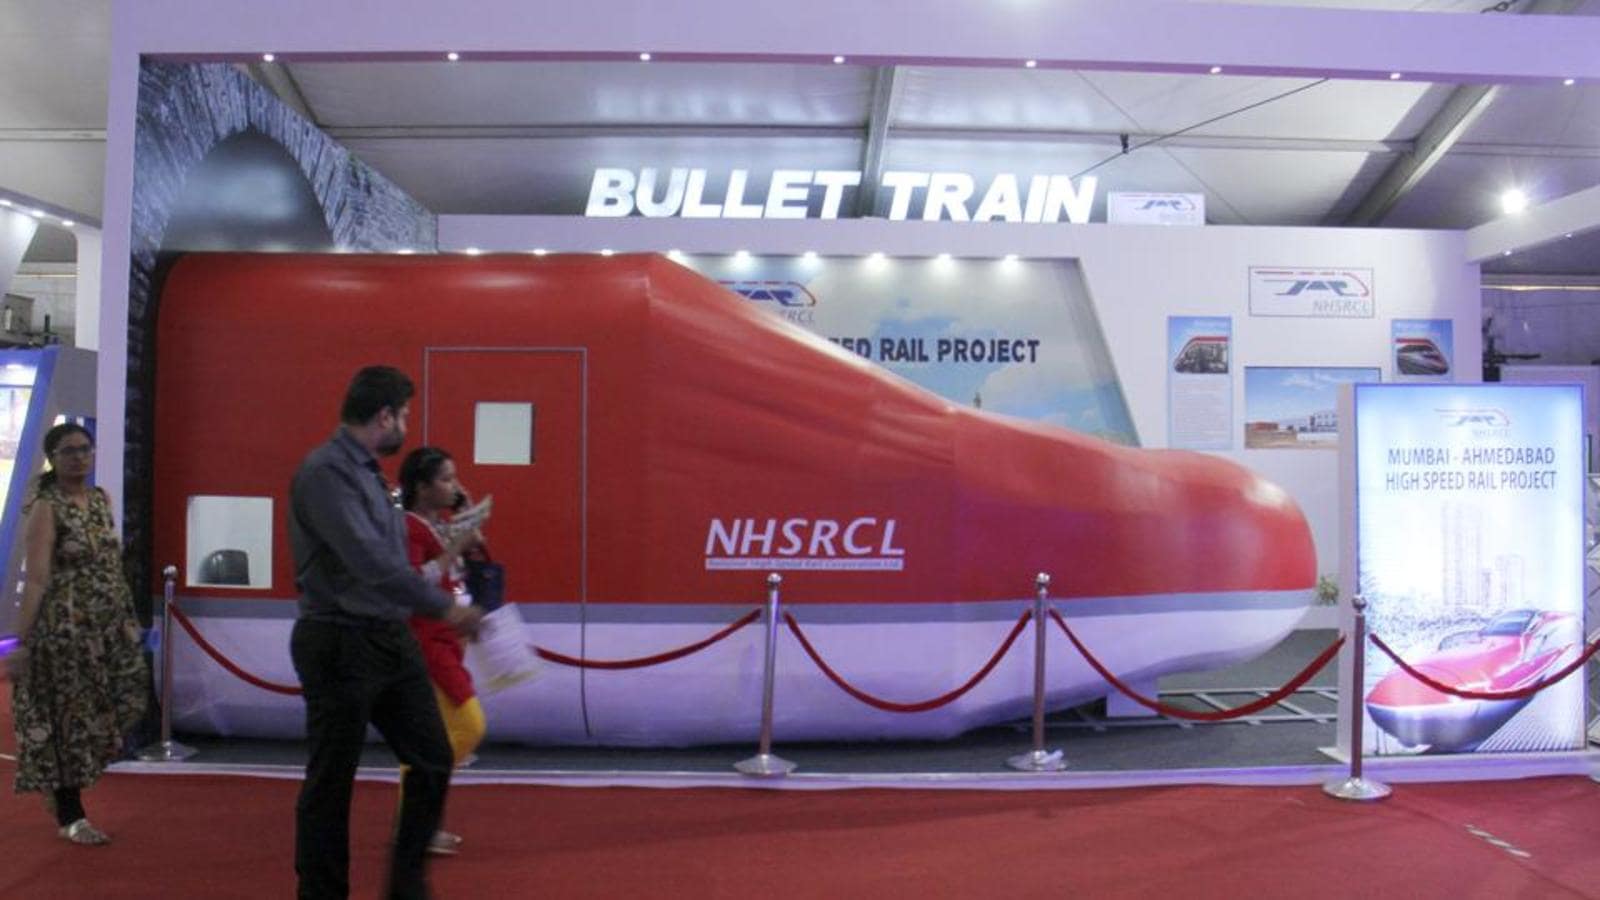 Mumbai Ahmedabad Bullet Train To Miss Deadline 1st Phase Between Surat Bilimora To Open In 2026